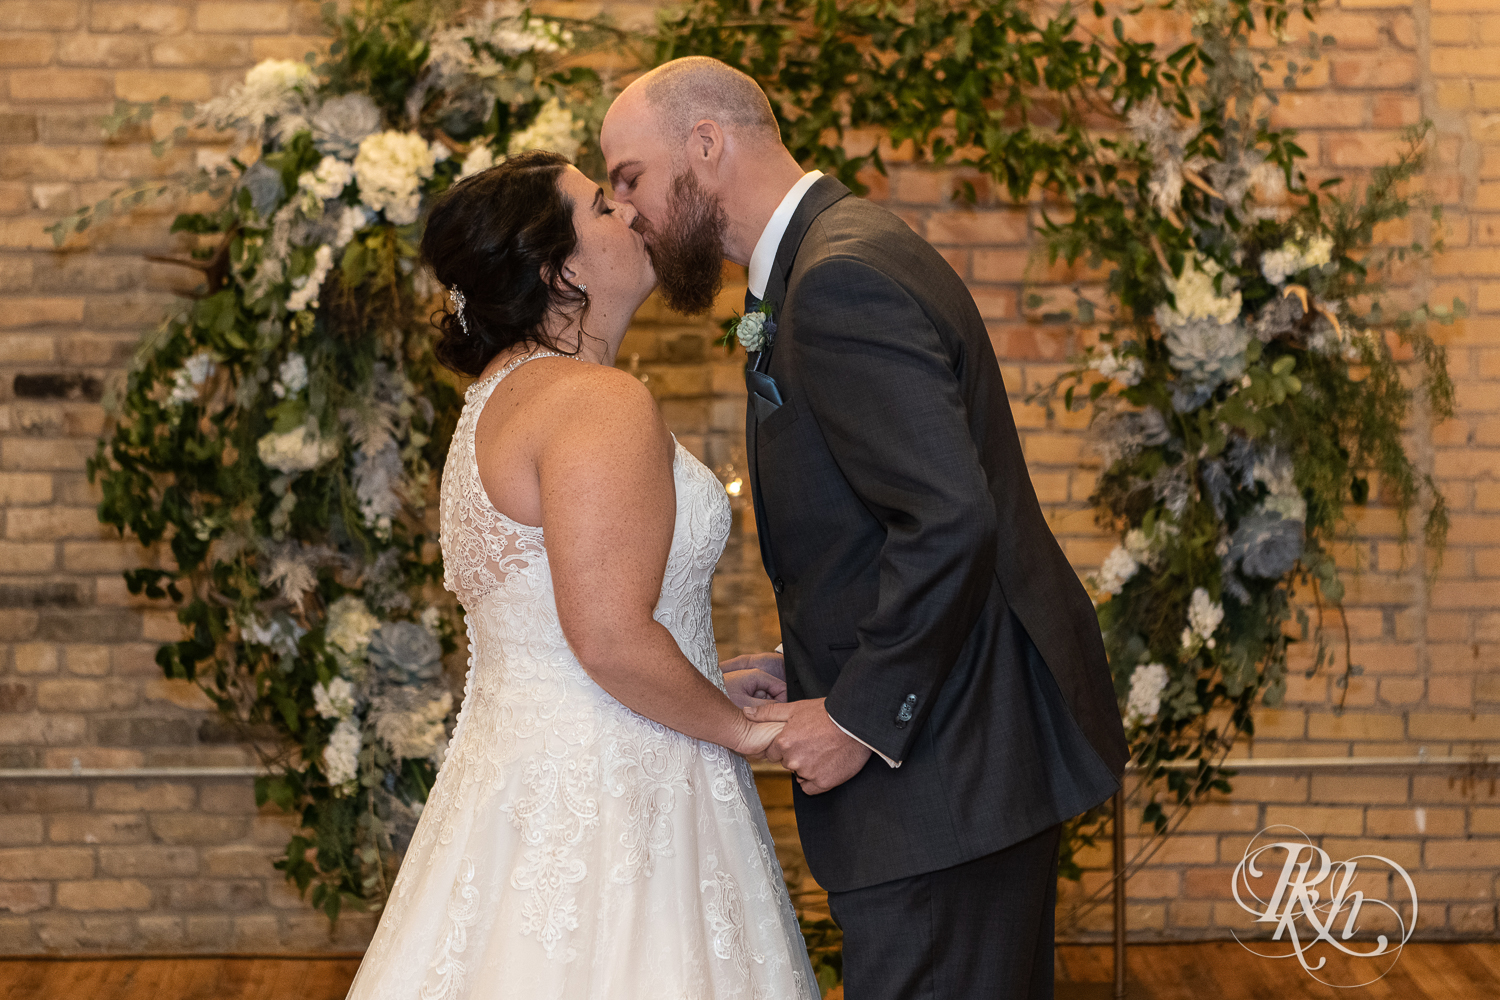 Bride and groom kiss during wedding ceremony at Minneapolis Event Centers in Minneapolis, Minnesota.